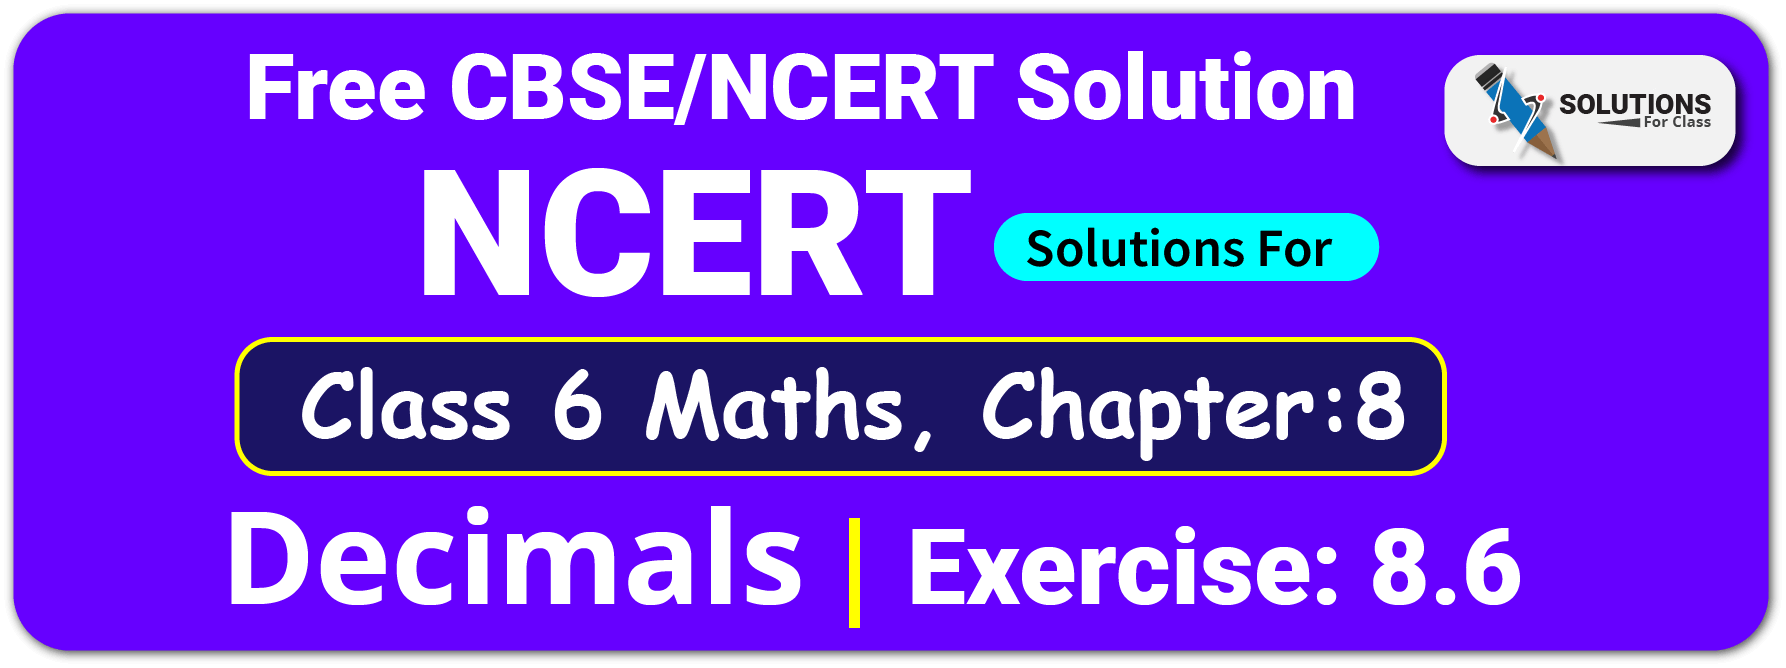 NCERT Solutions For Class 6 Maths Chapter 8 Decimals Exercise 8.6